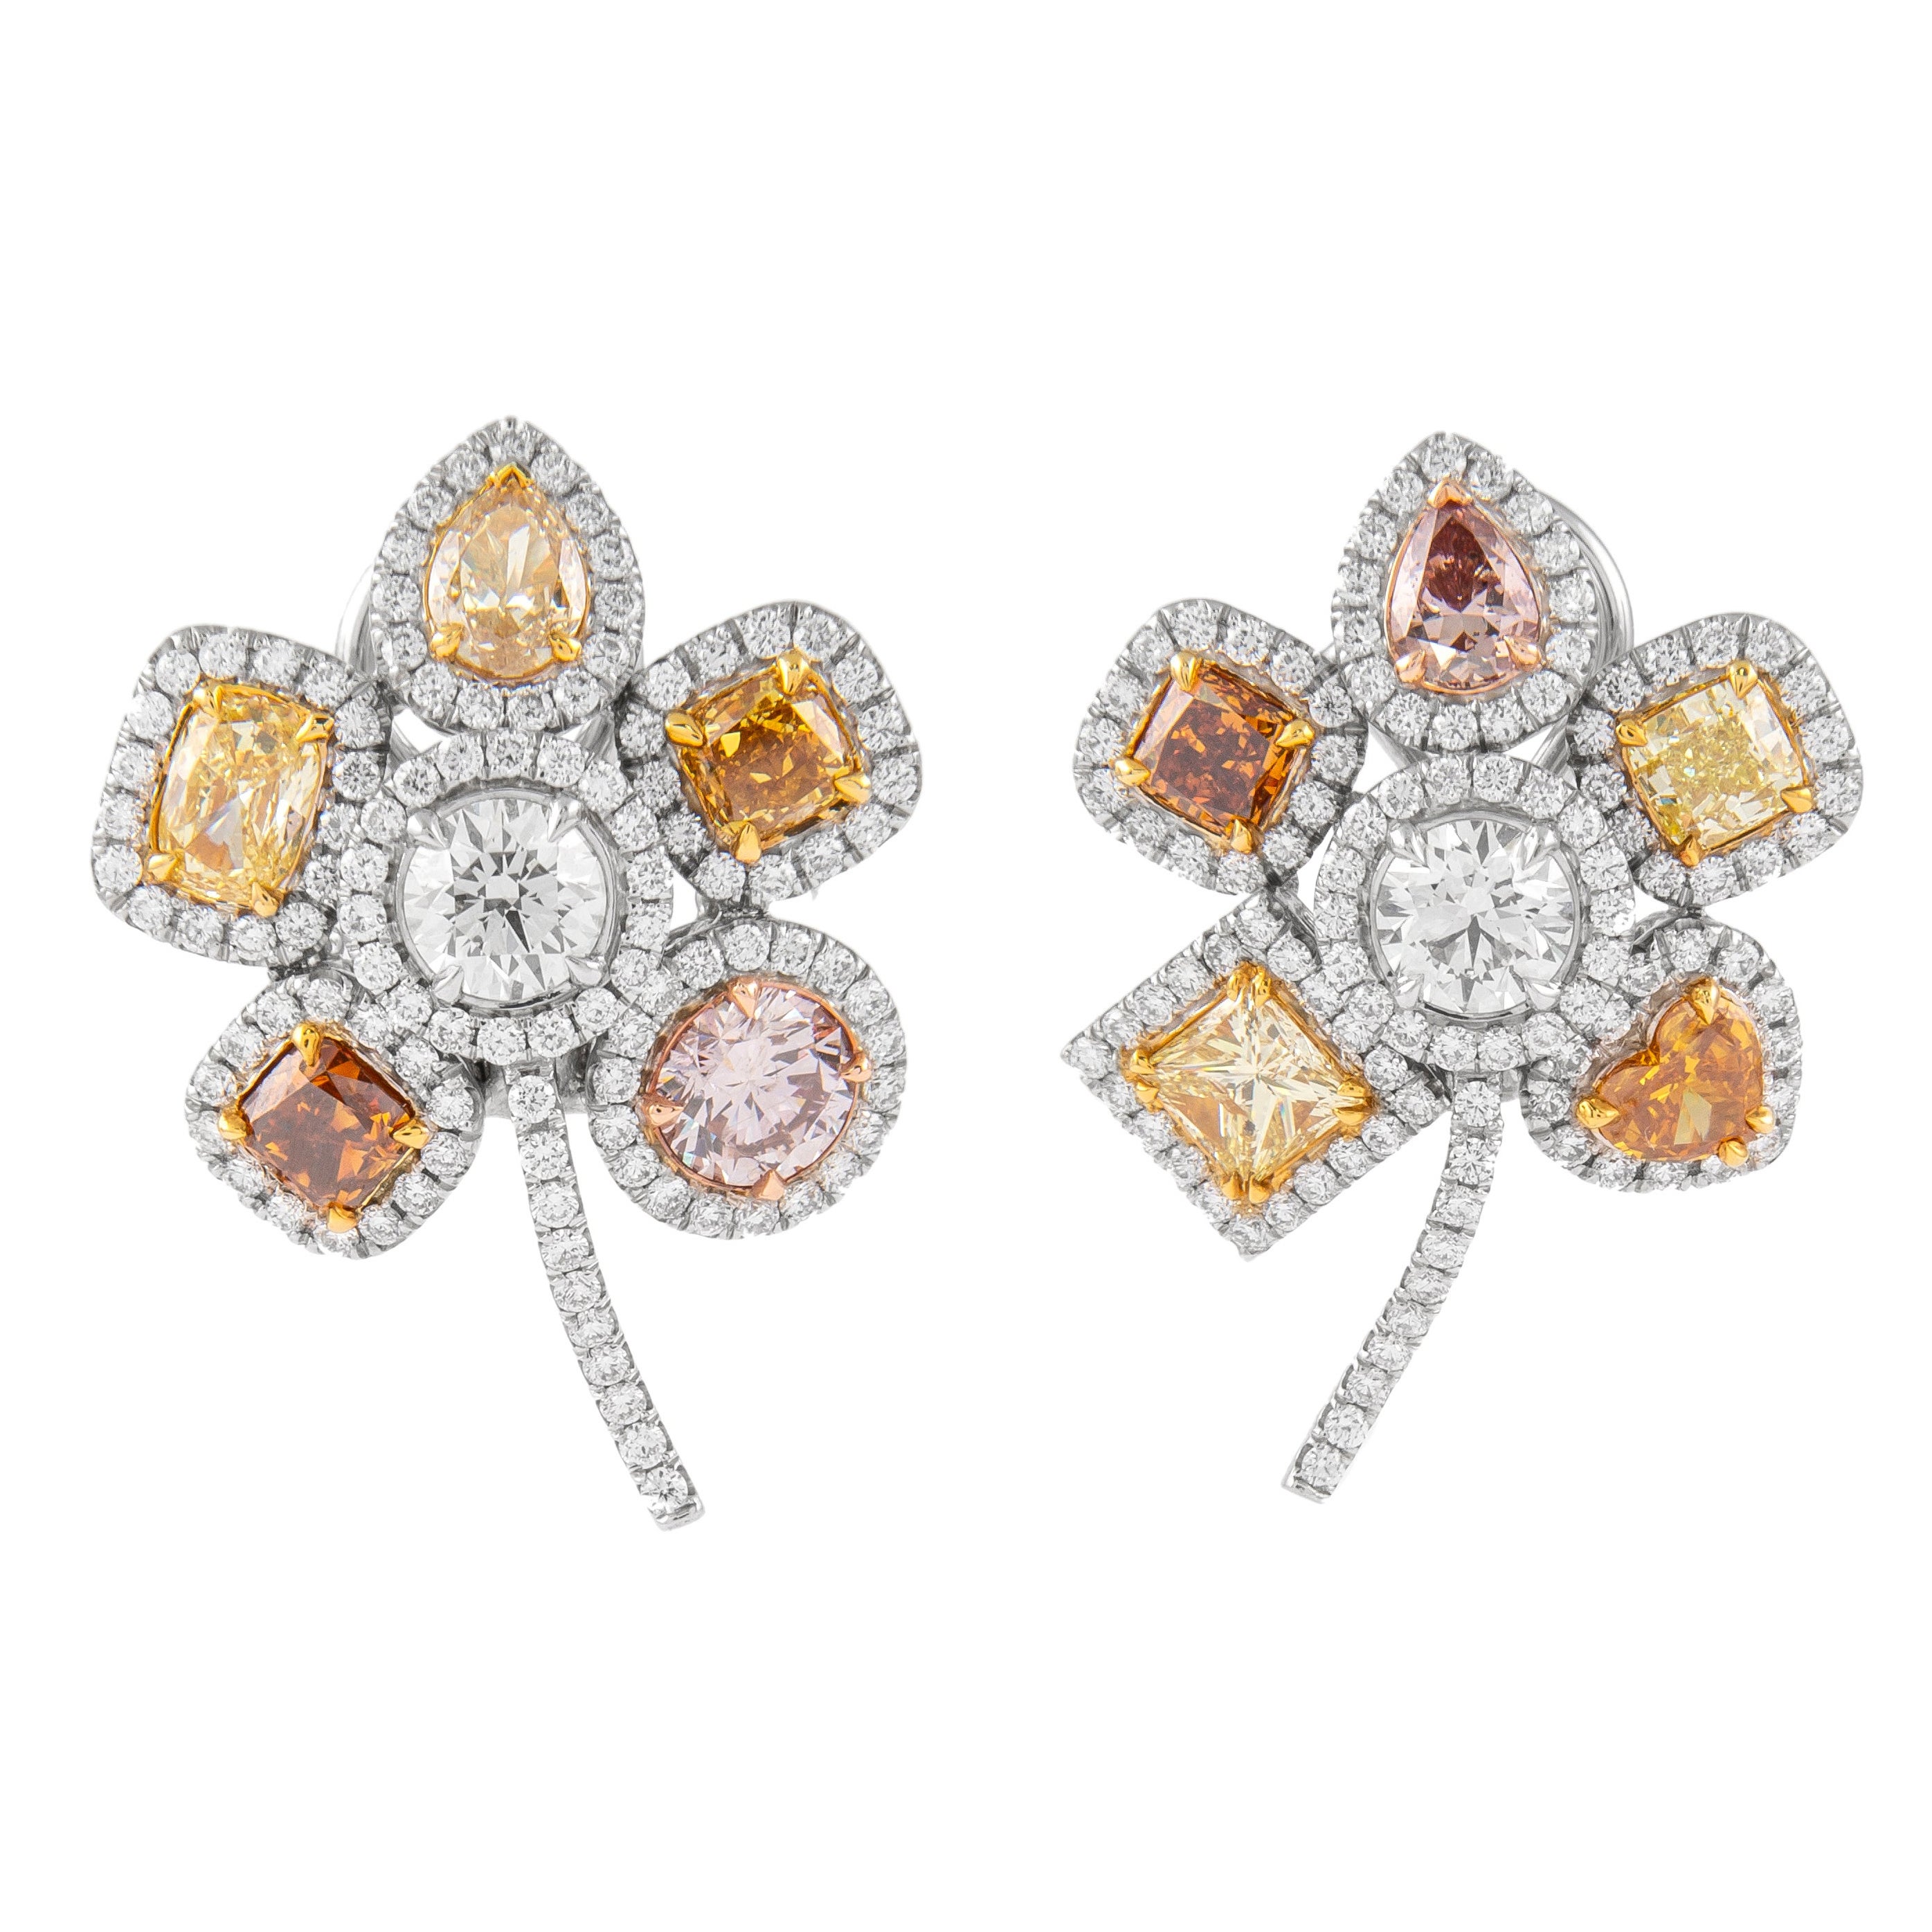 Alexander Beverly Hills GIA 7.52ct Fancy Color Diamond Floral Earrings Or 18k